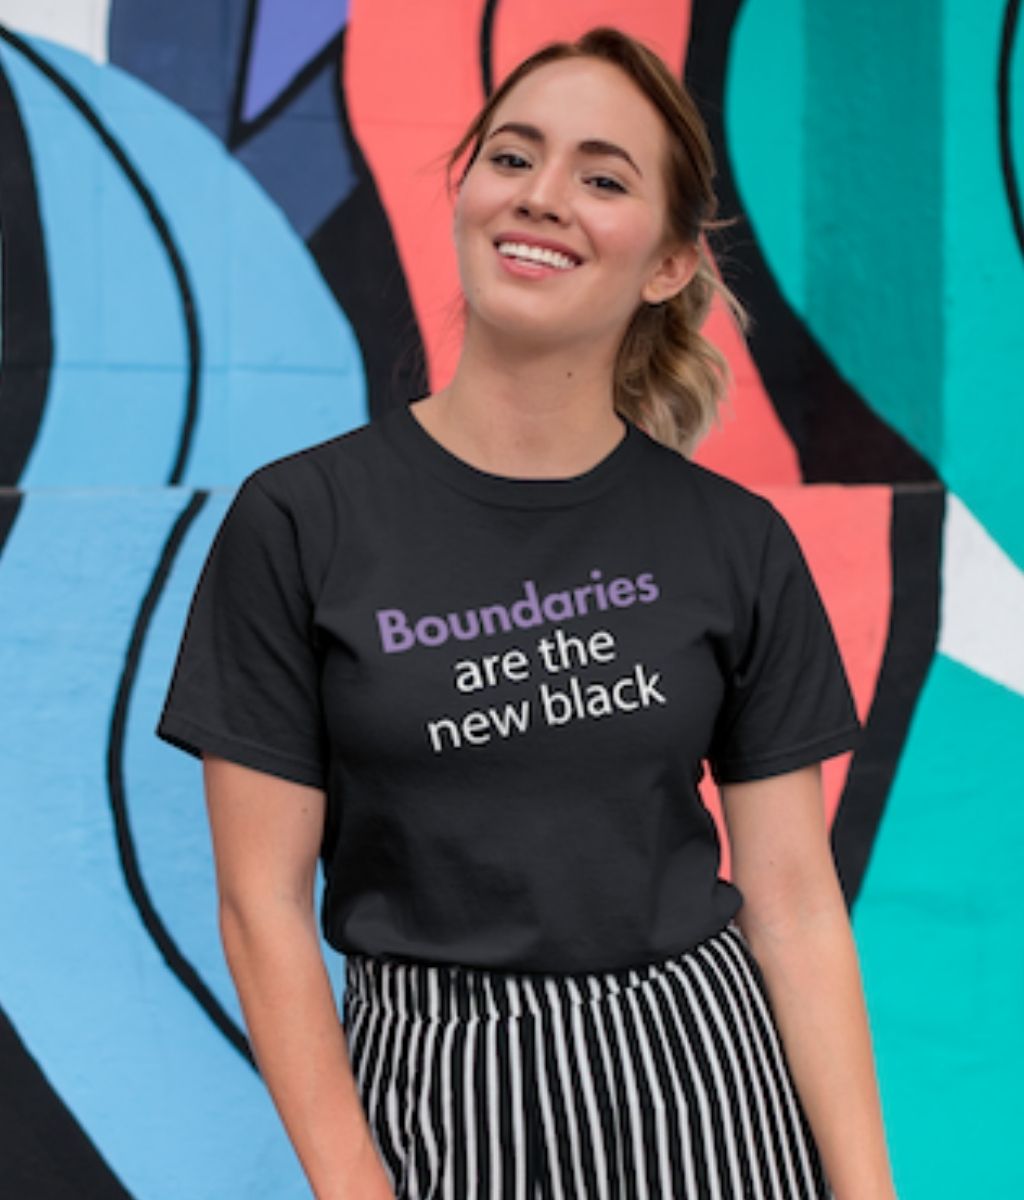 Boundaries are the new black